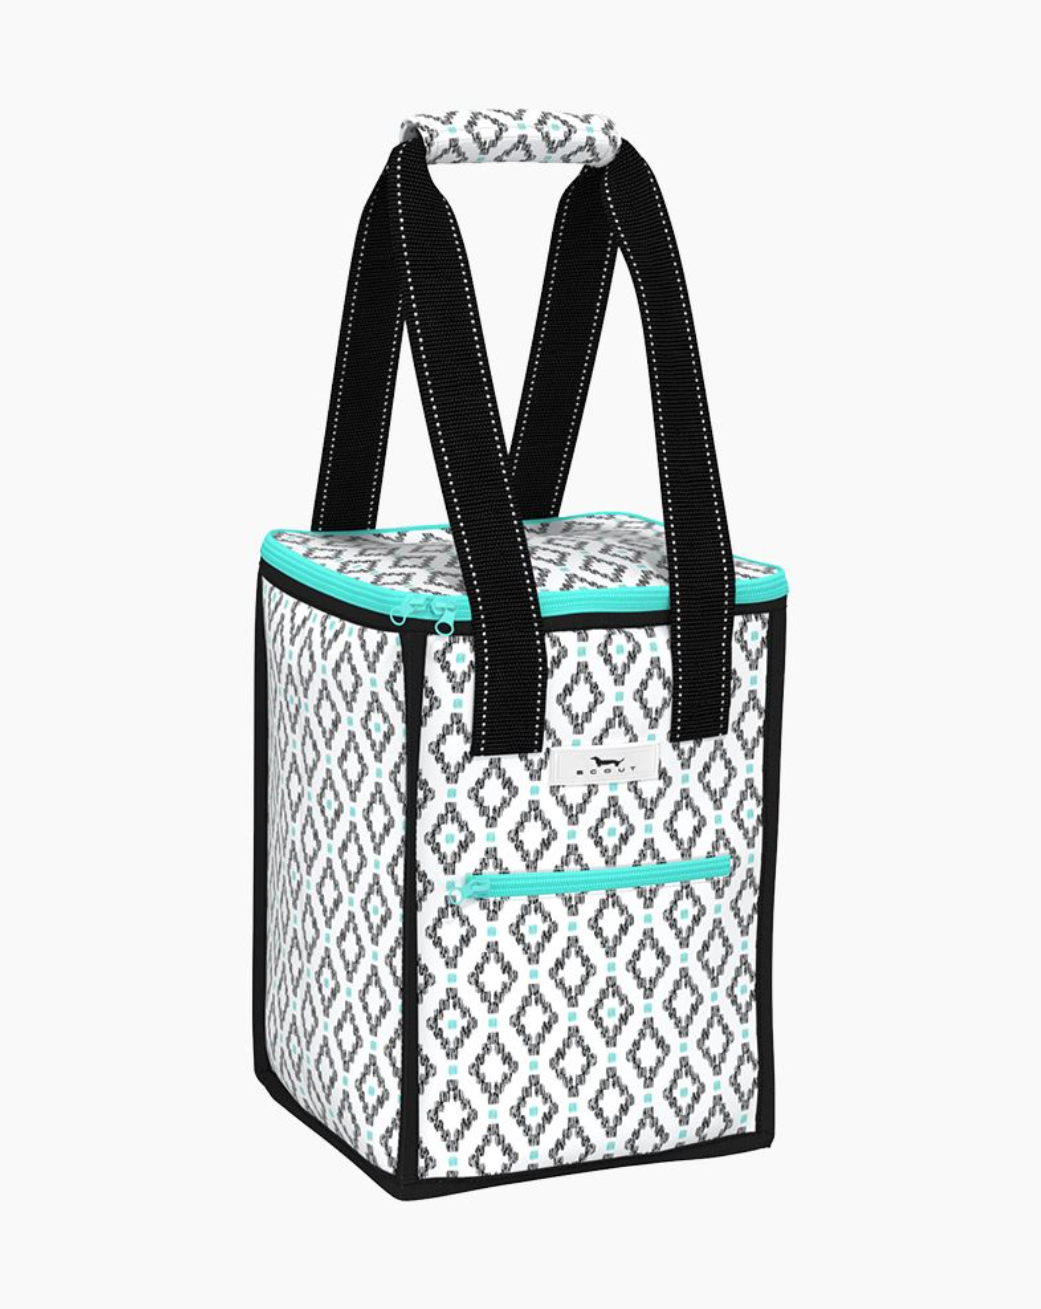 Scout Pleasure Chest Cooler Coolers in Teal Diamond at Wrapsody